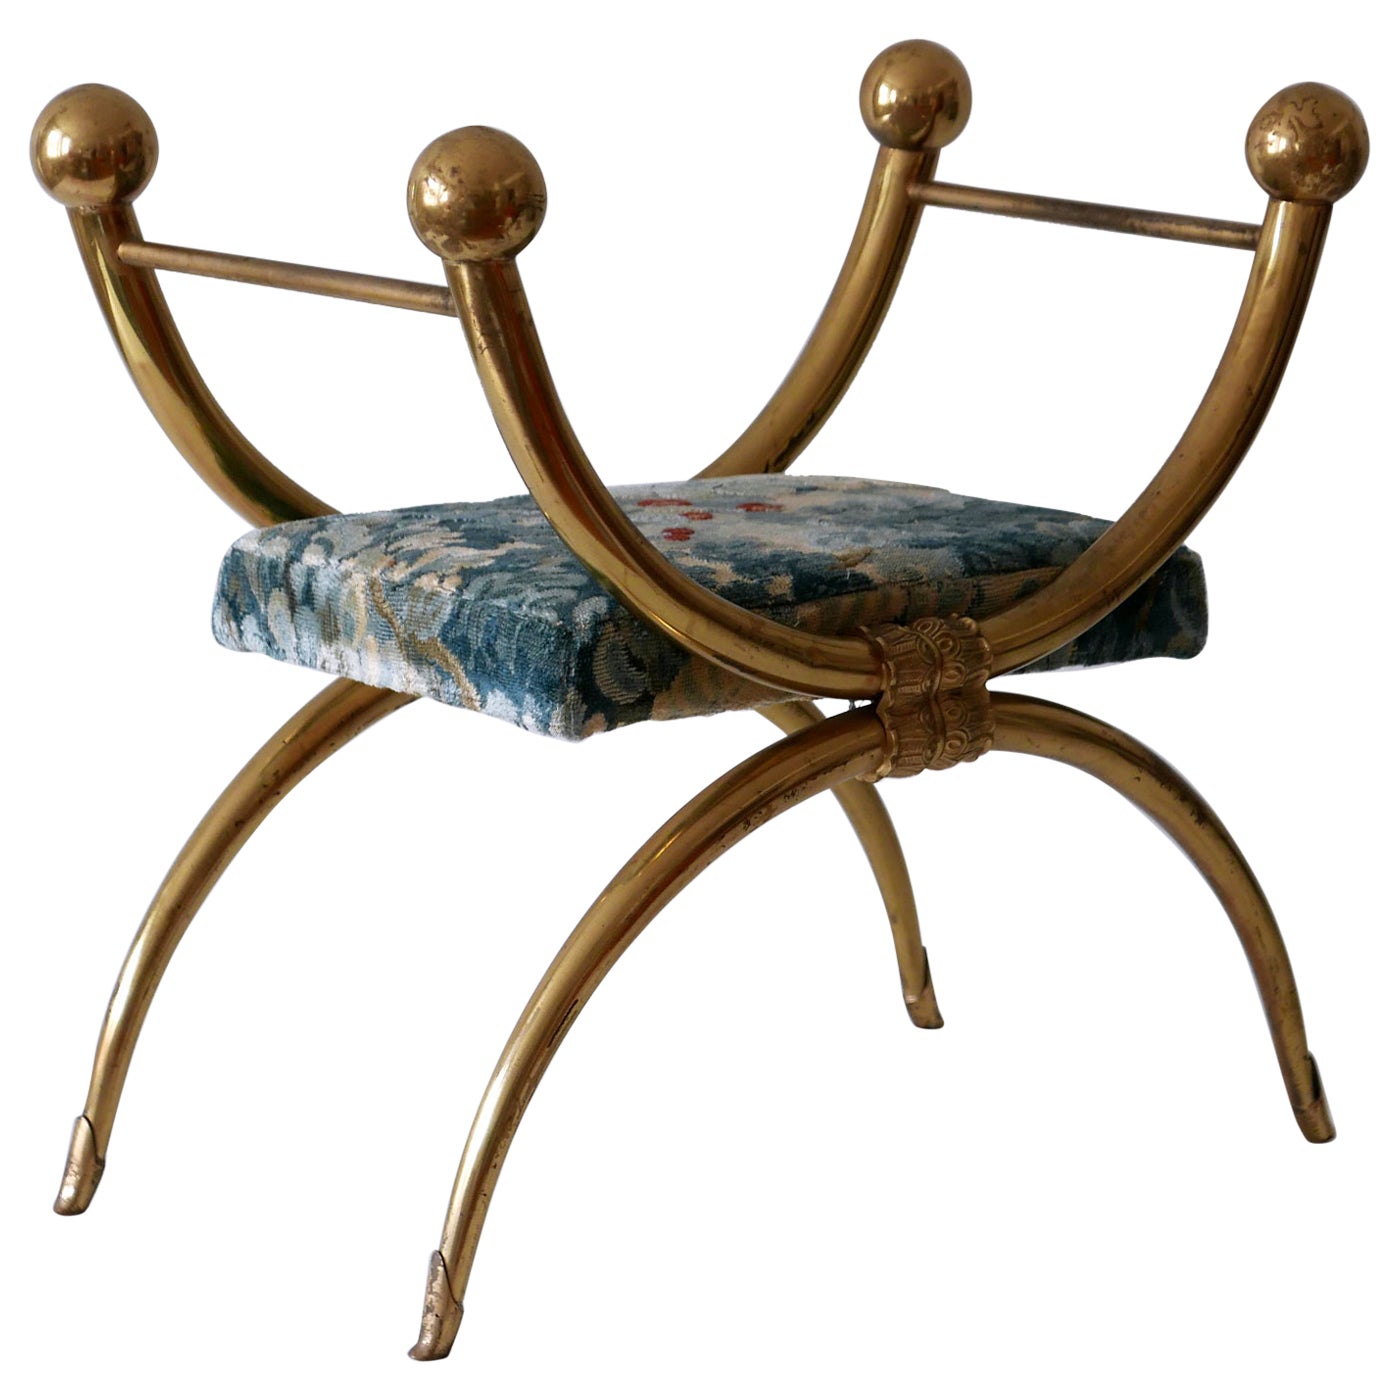 Exceptionally Beautiful Mid-Century Modern Brass Bench or Stool, 1950s, Italy